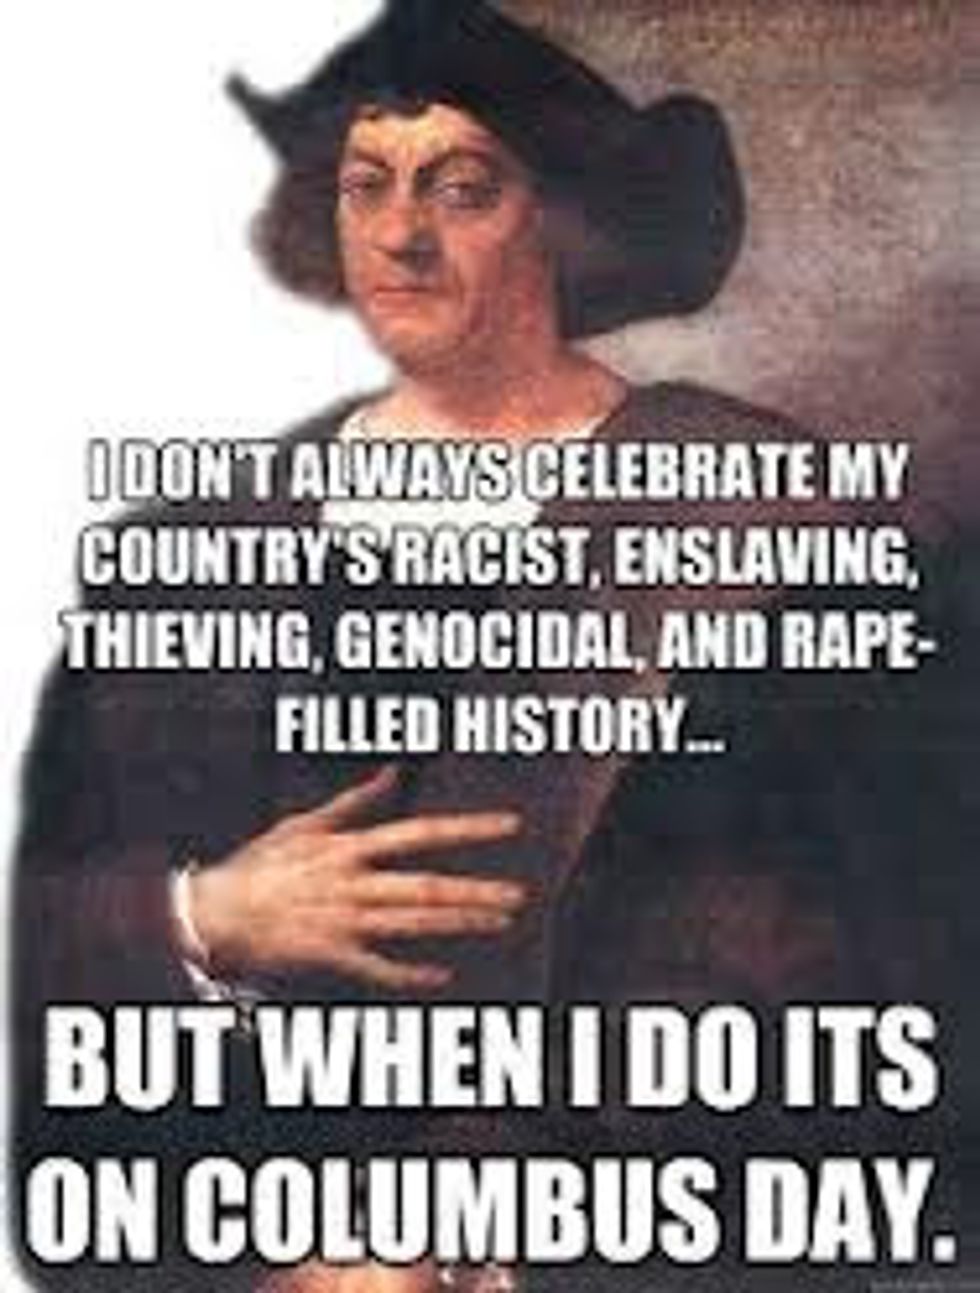 Christopher Columbus was a Monster